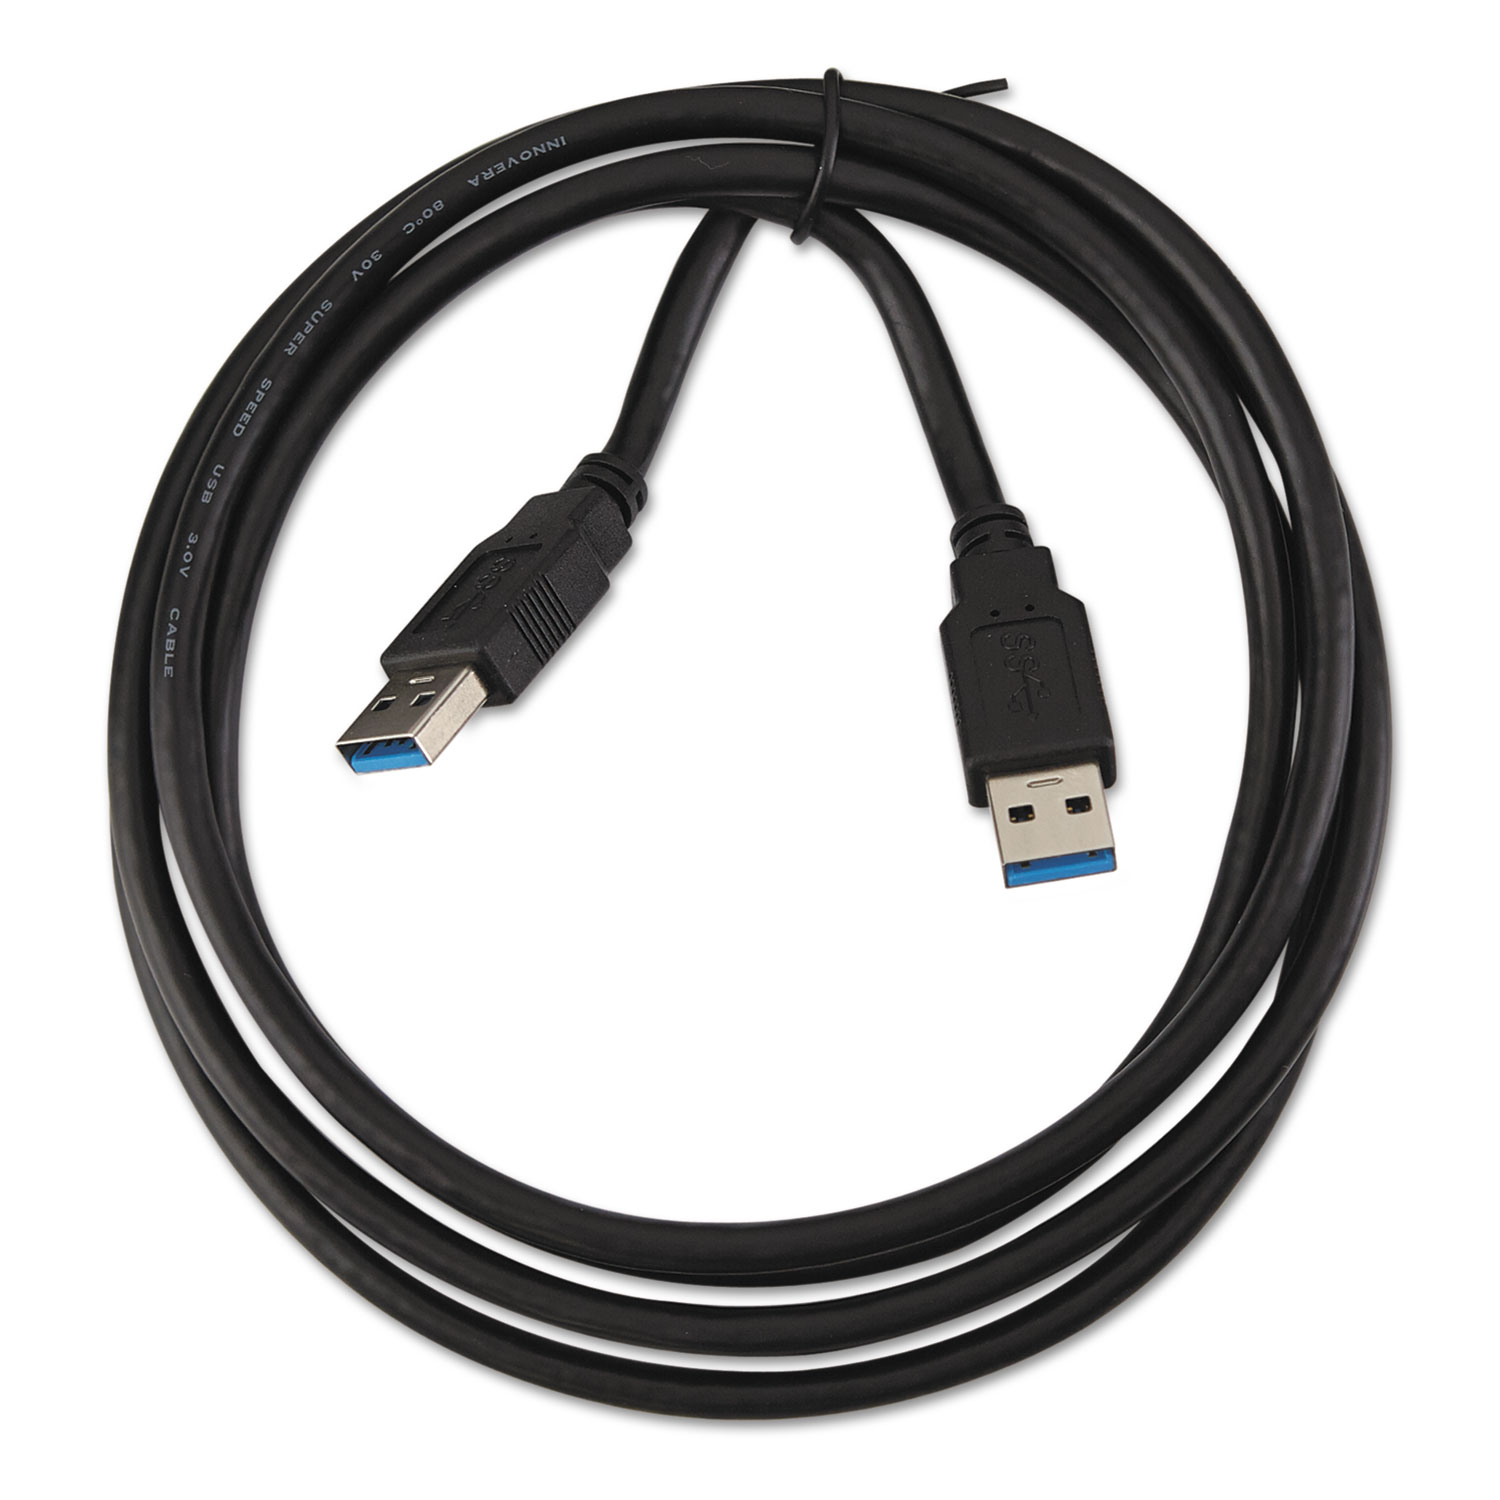 3.0 USB High Speed Cable, AM/AM, 6 ft., Black